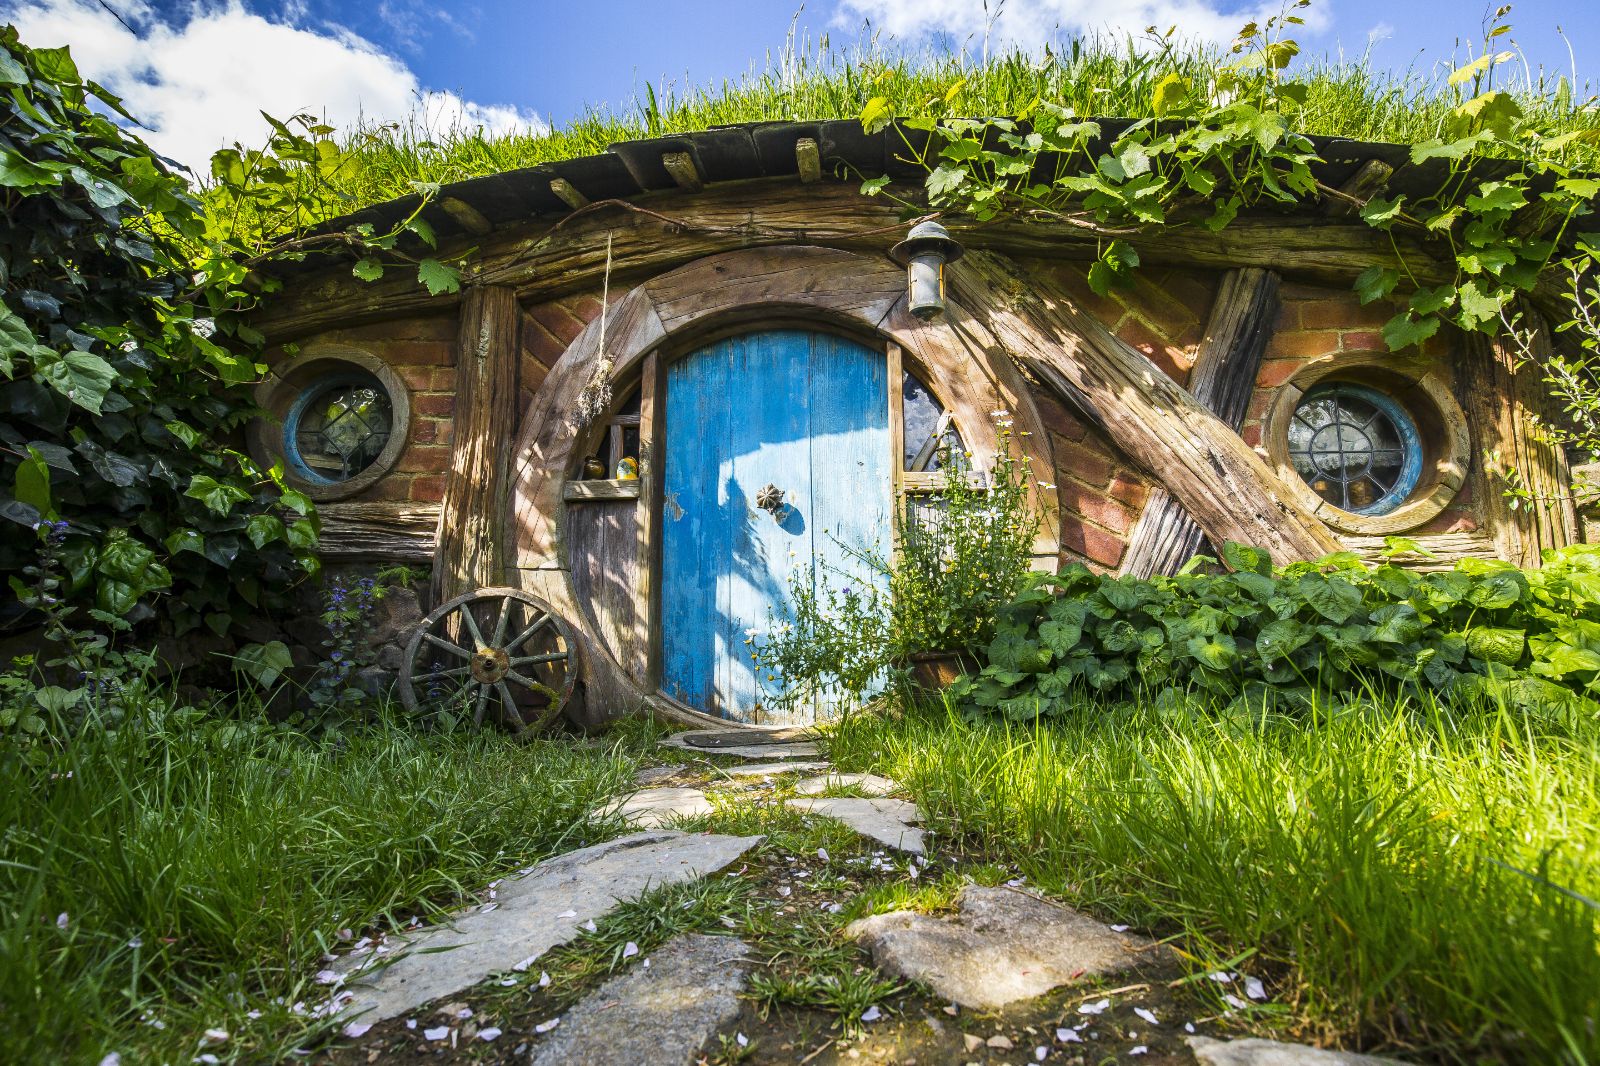 The Hobbiton Movie Set used for the Lord of the Rings film triology in Matamata, North Island New Zealand